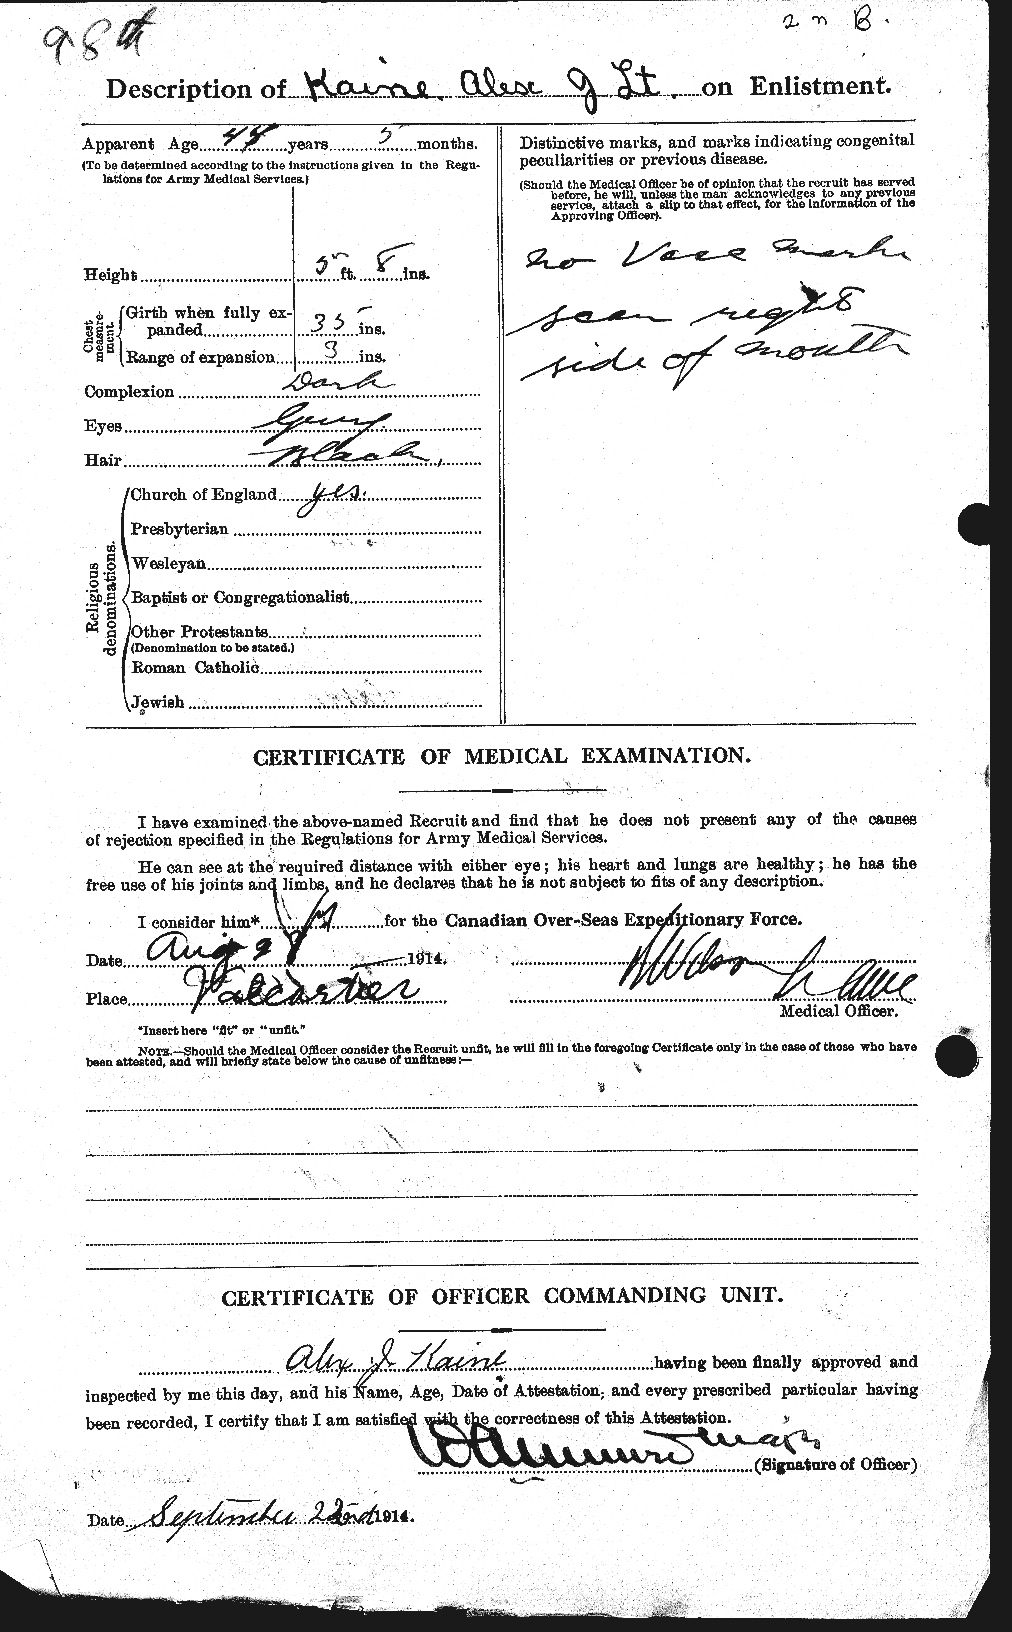 Personnel Records of the First World War - CEF 428221b